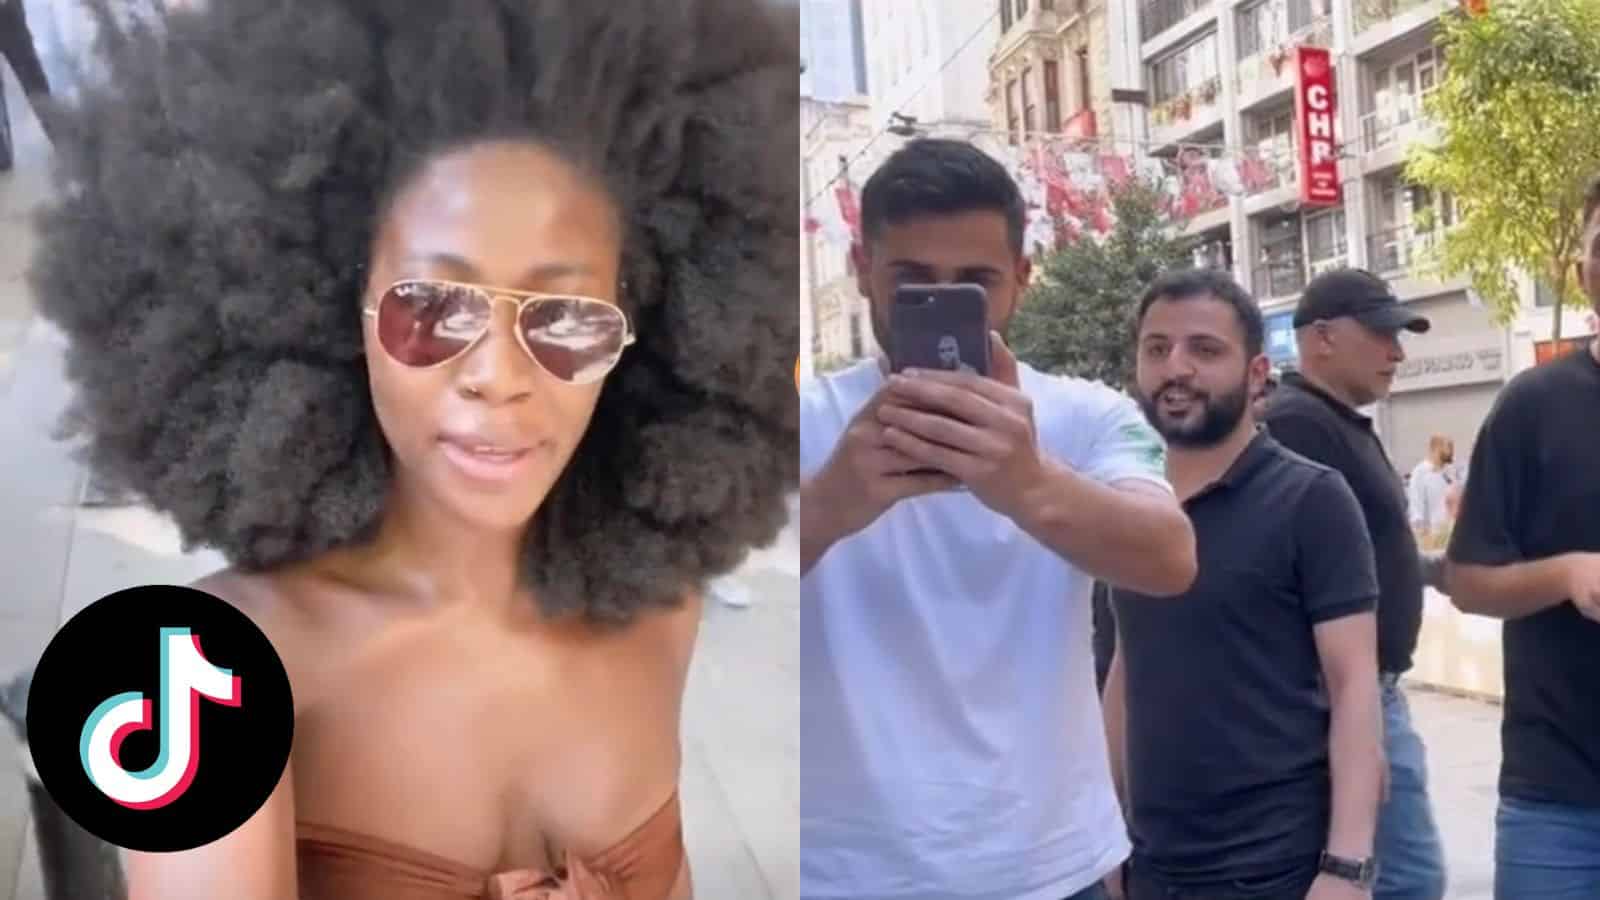 TikTok shows Black woman being swarmed by people in Turkey asking for selfies with her